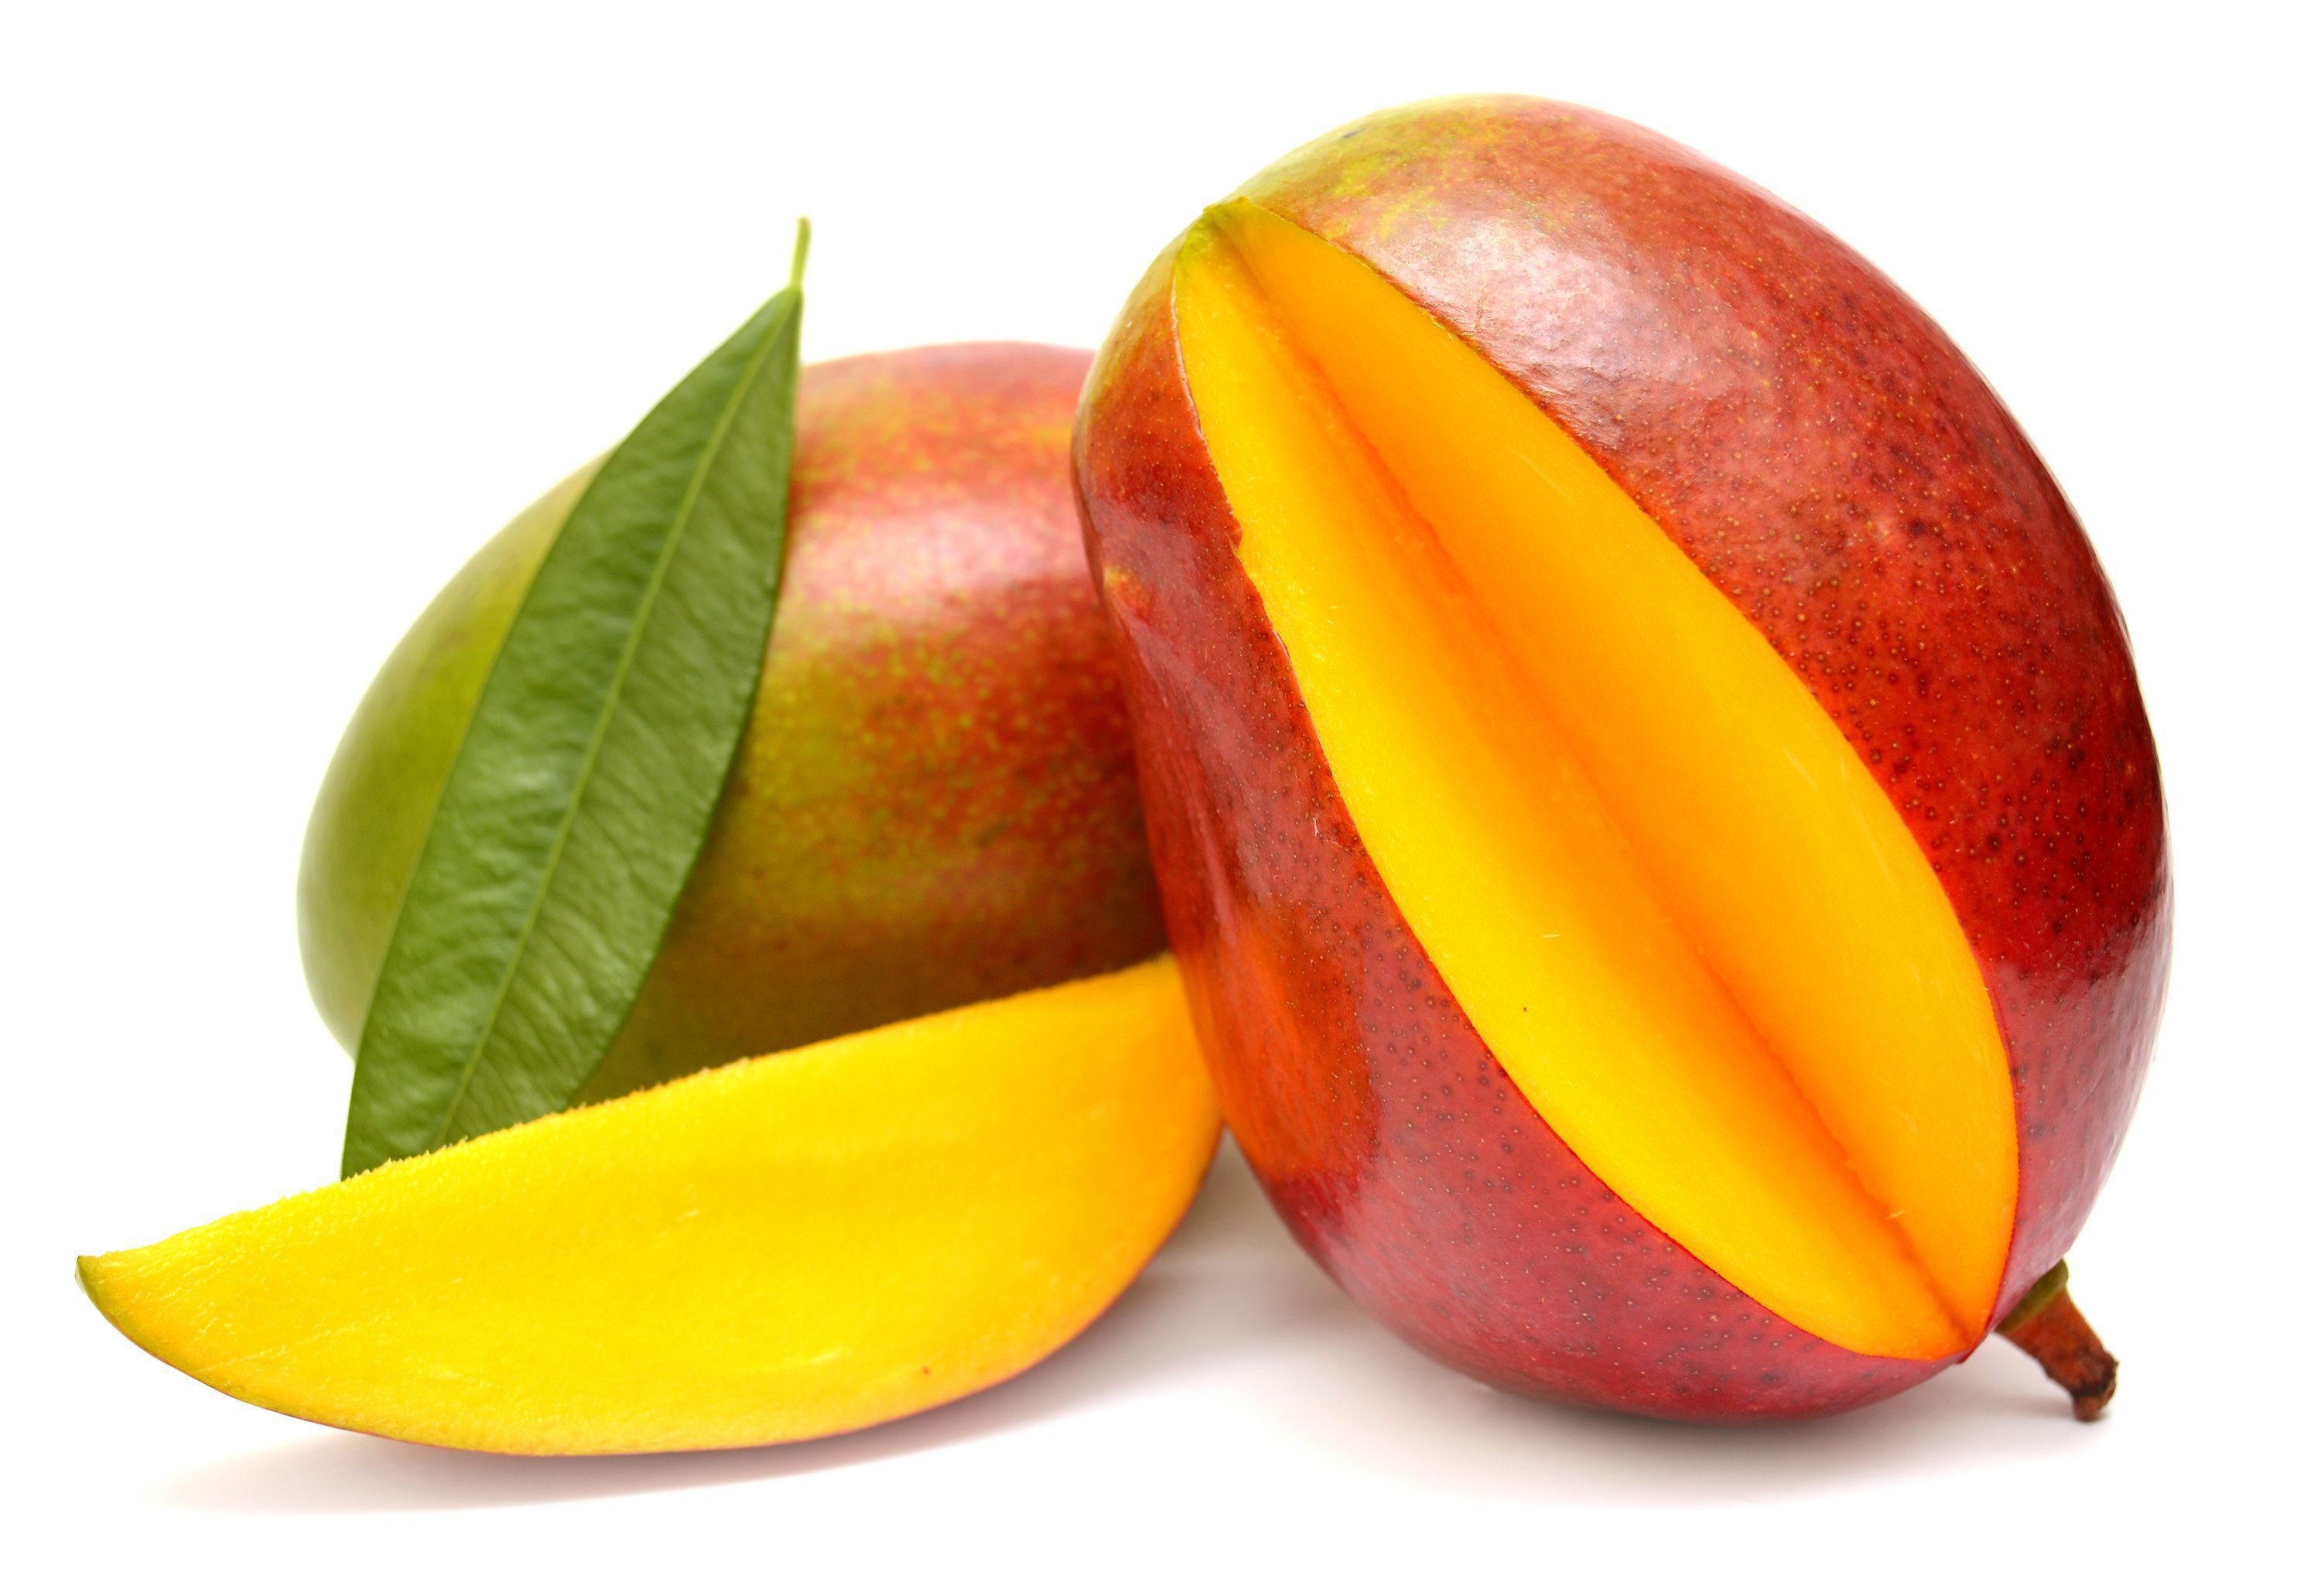 Mango Wallpaper Image Photos Pictures Background